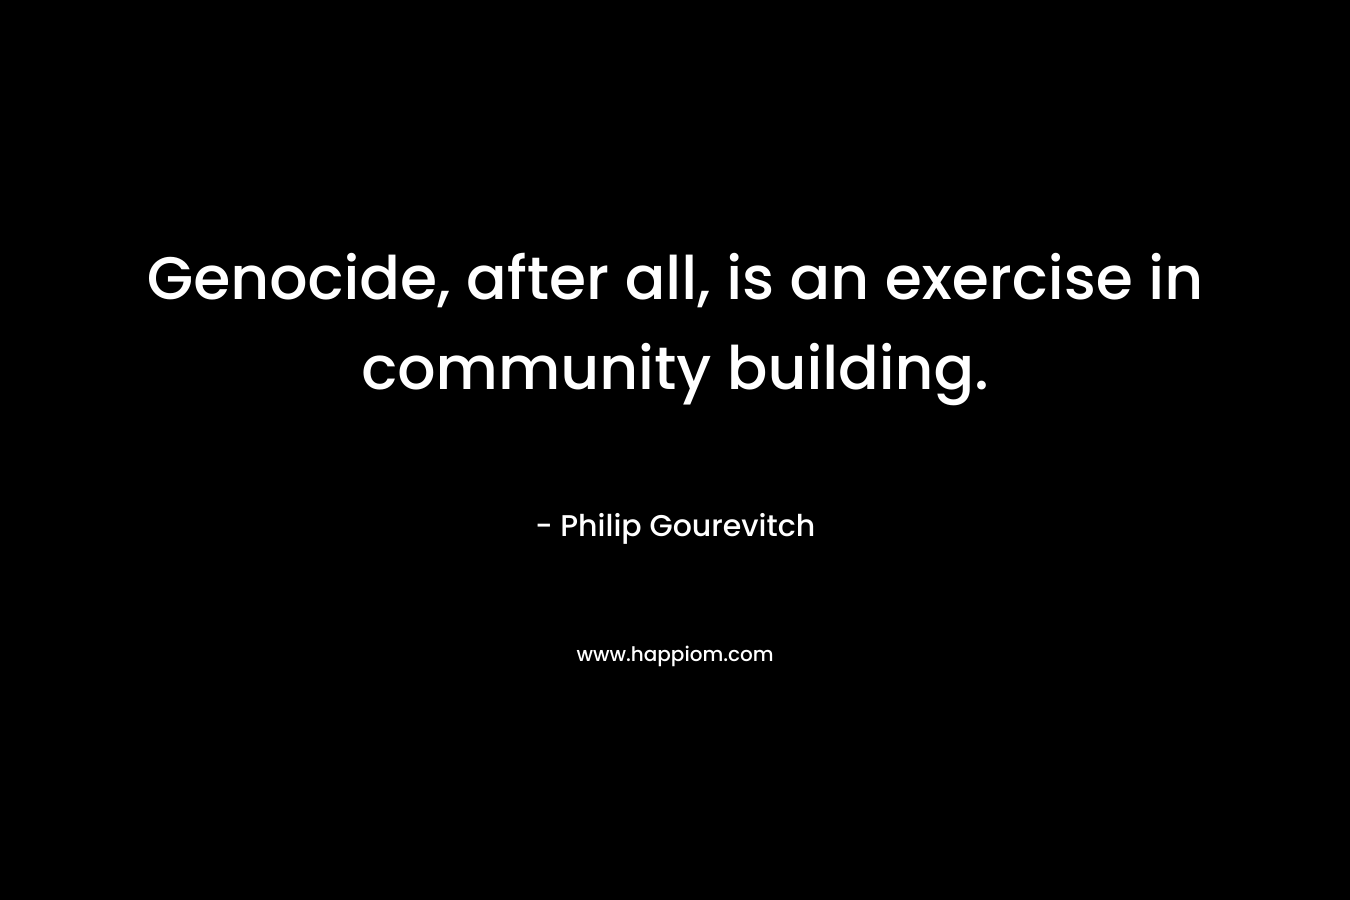 Genocide, after all, is an exercise in community building.